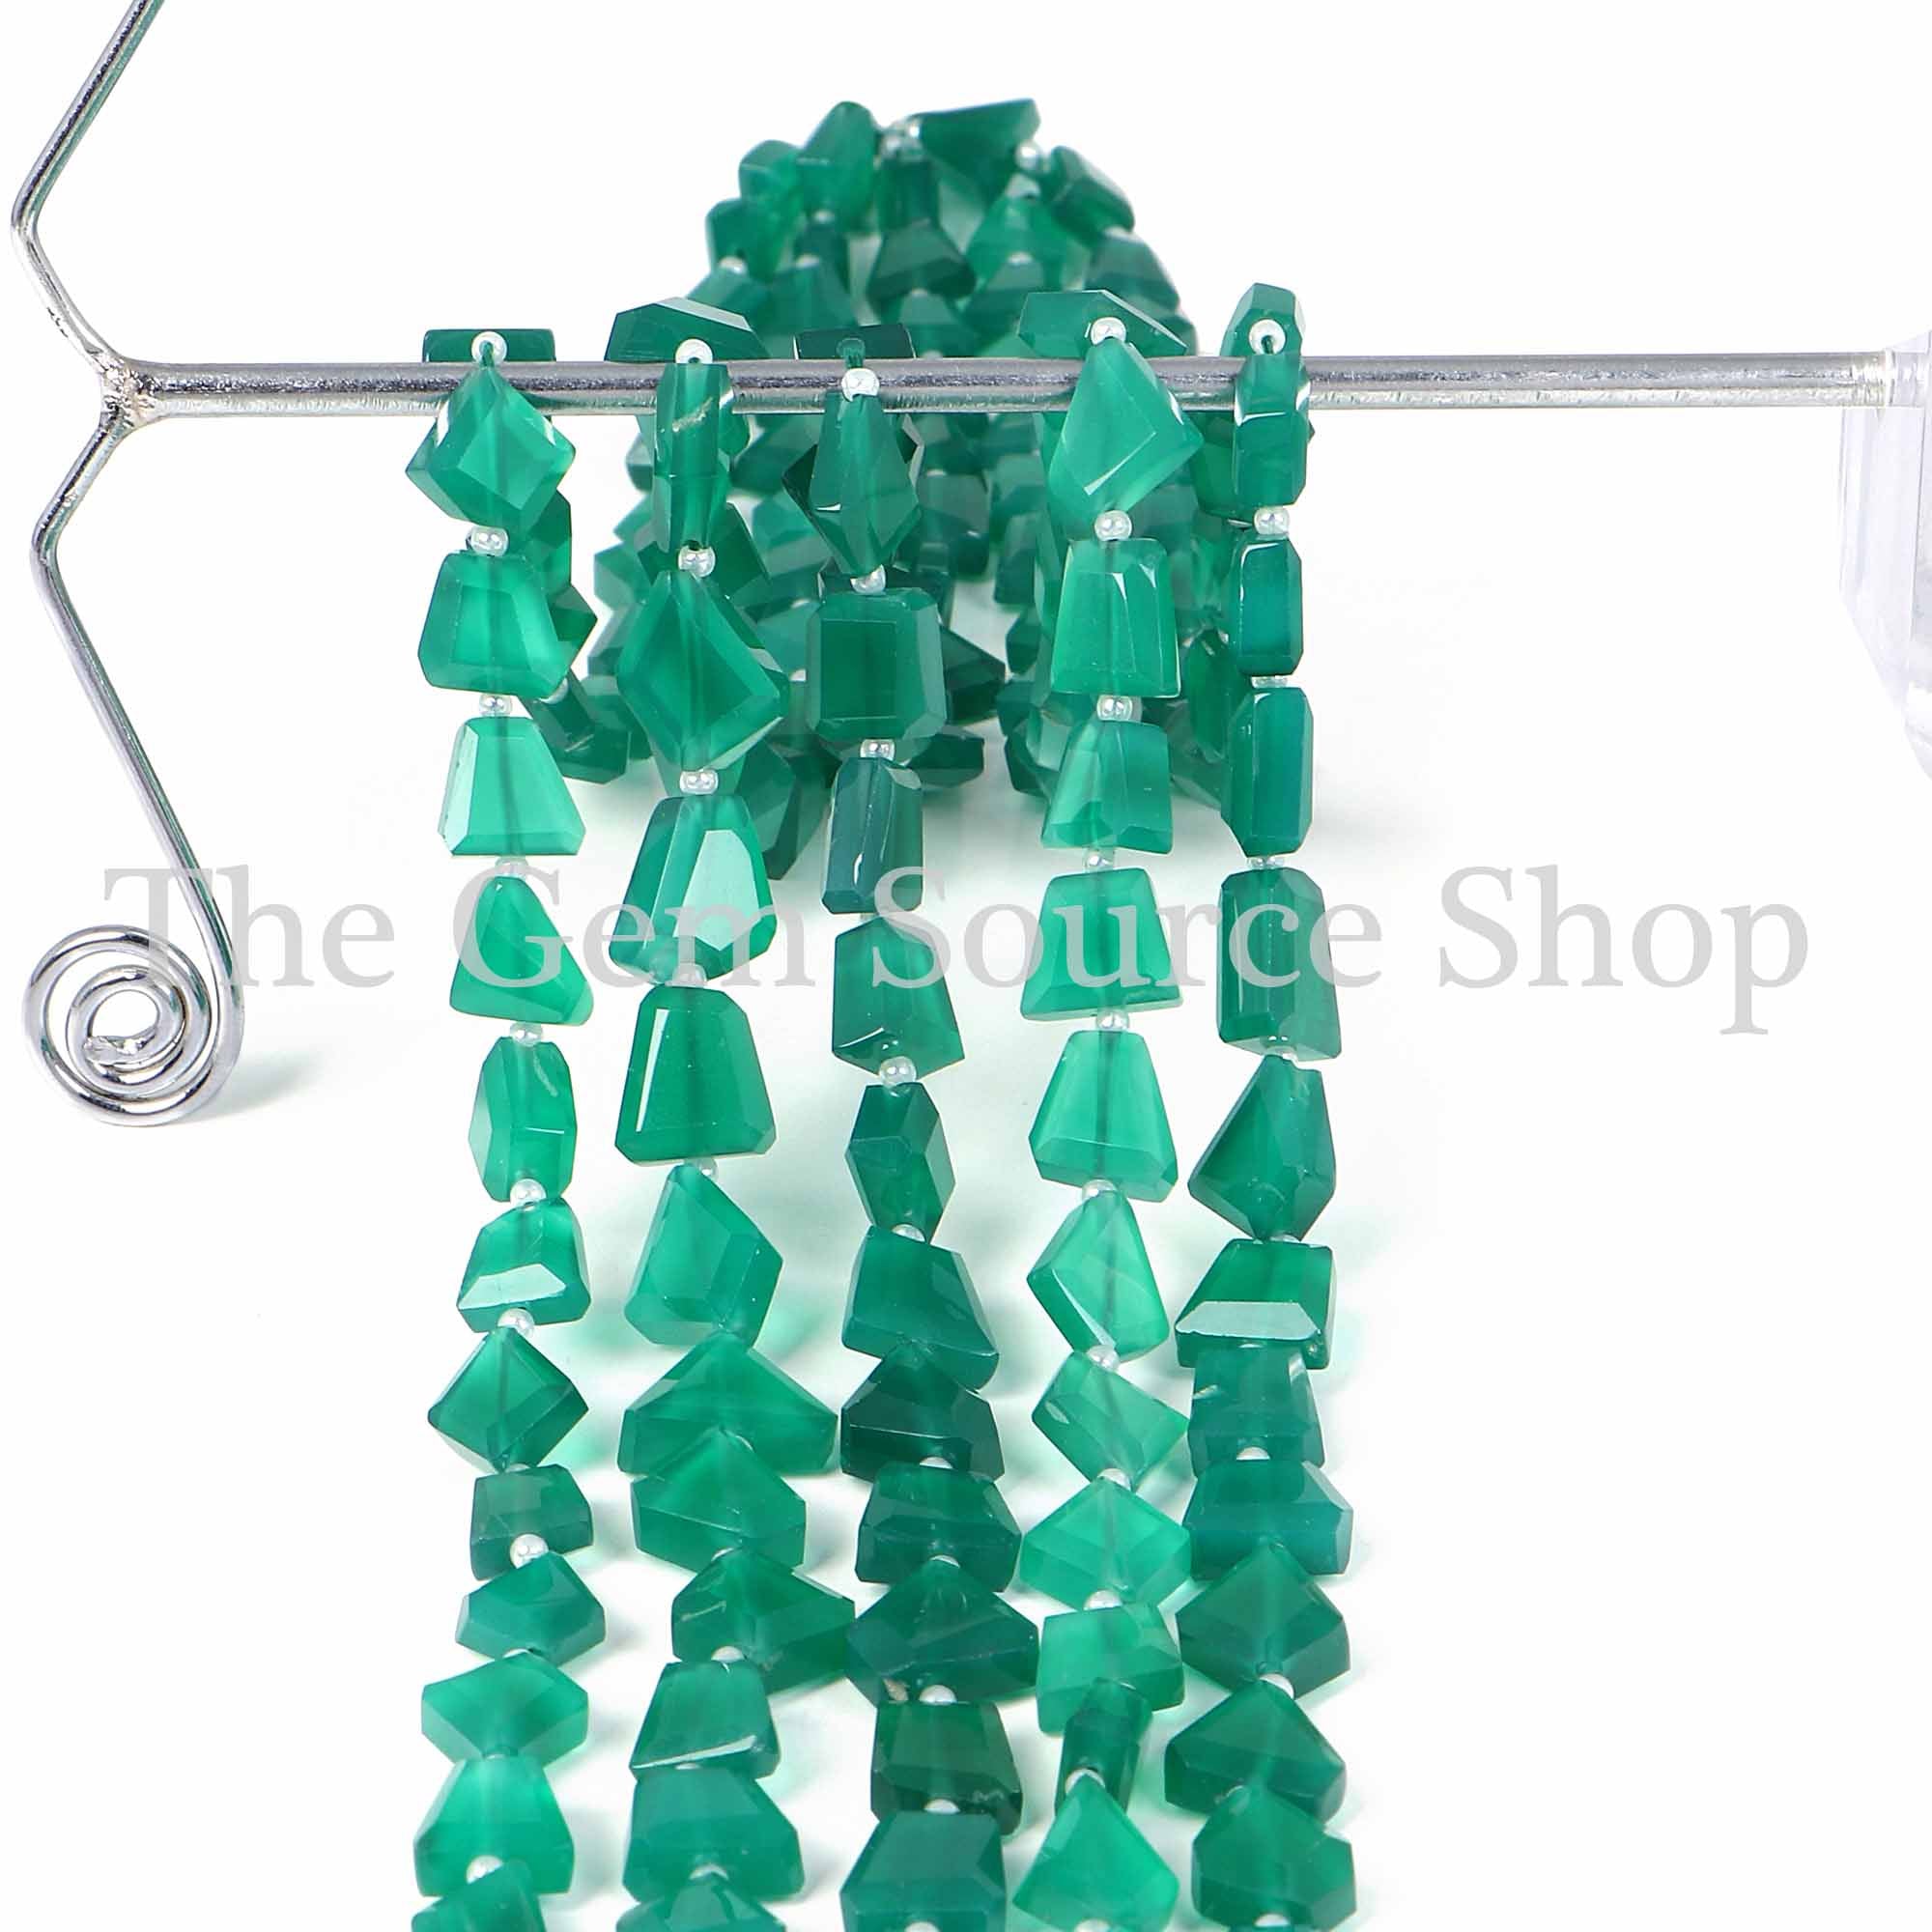 Green Onyx Beads, Green Onyx Faceted Beads, Green Onyx Nugget Beads, Fancy Shape Beads